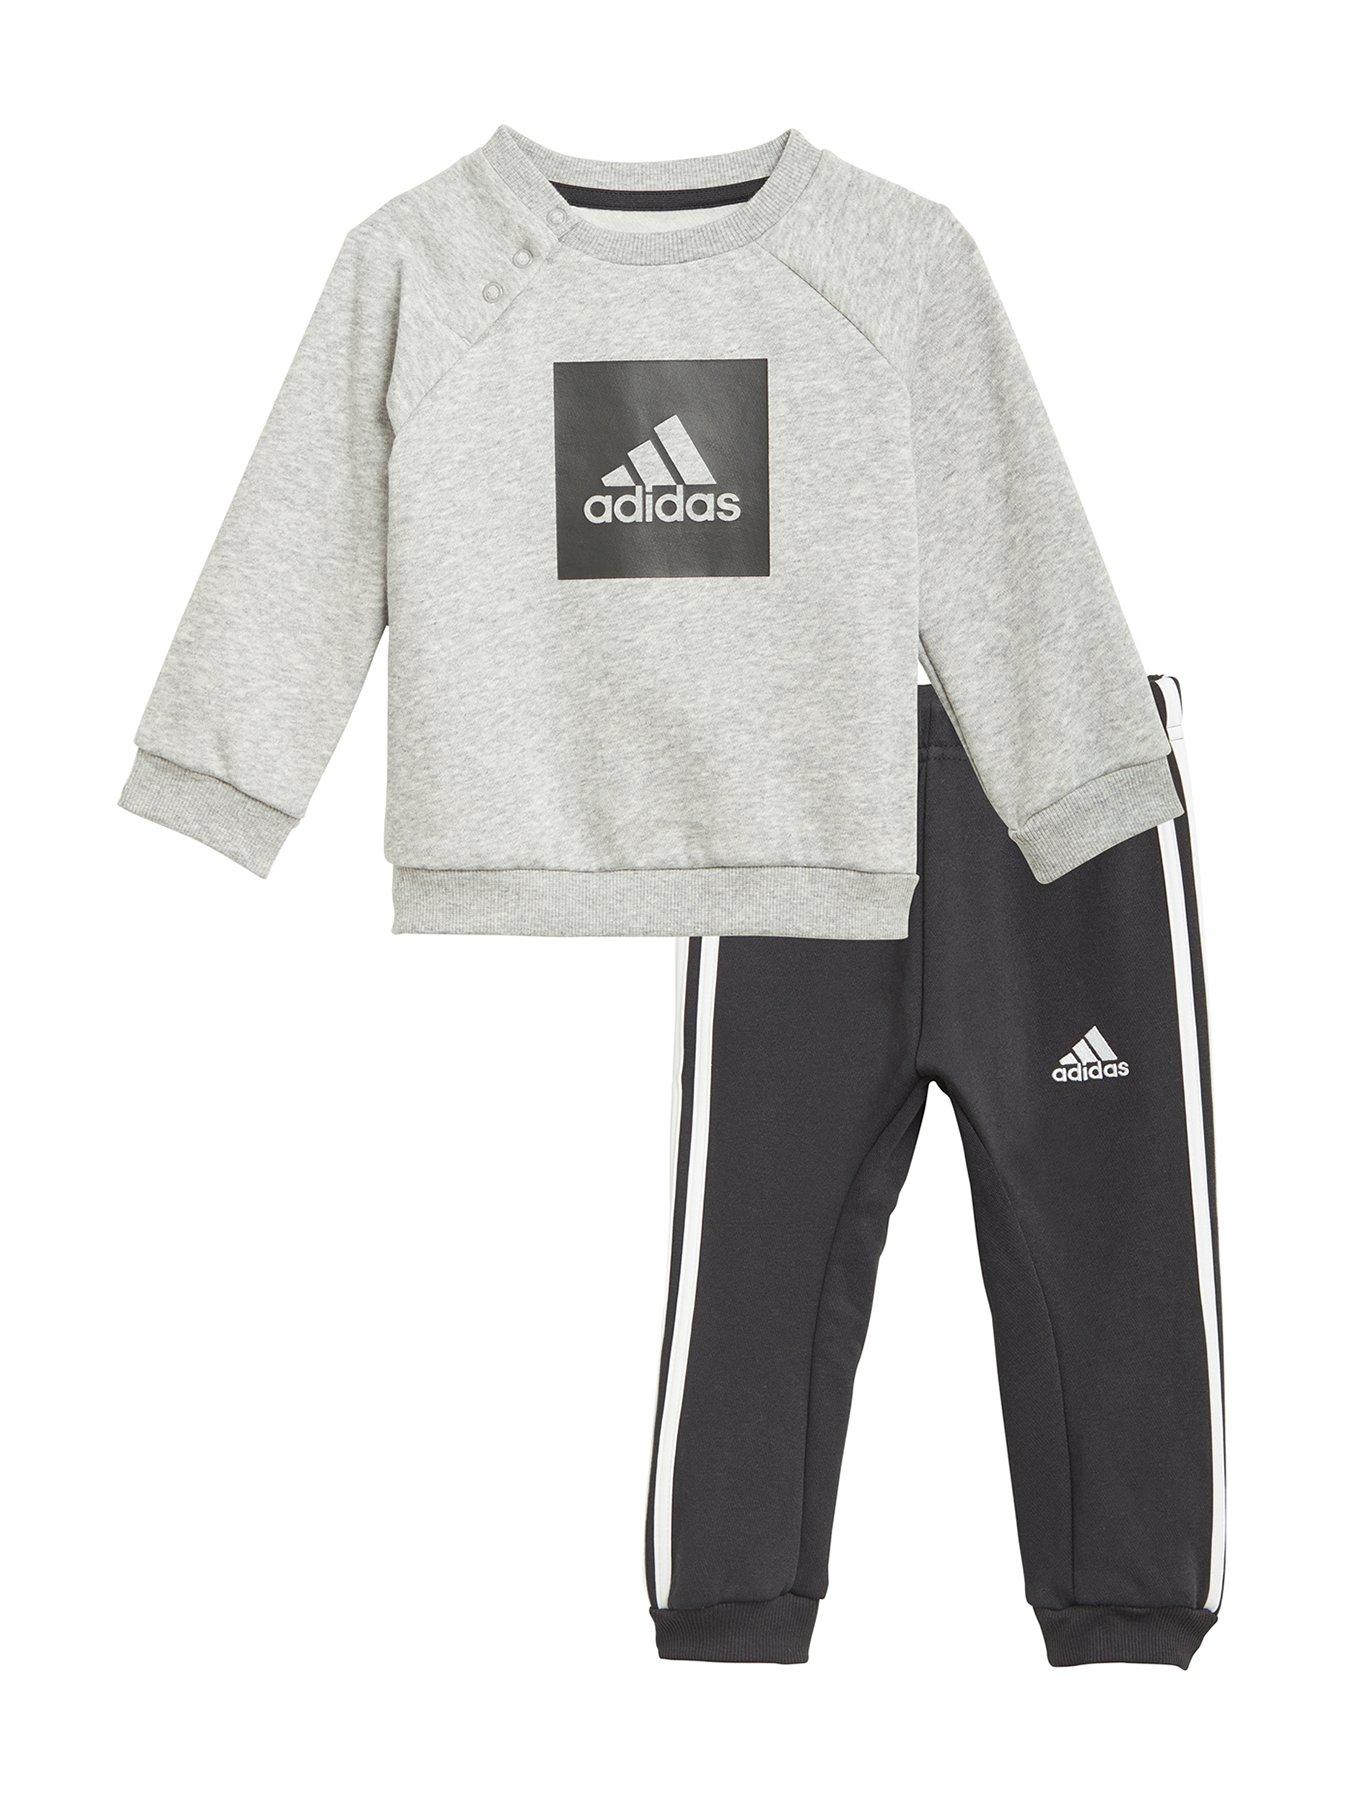 baby adidas tracksuit 9 12 months